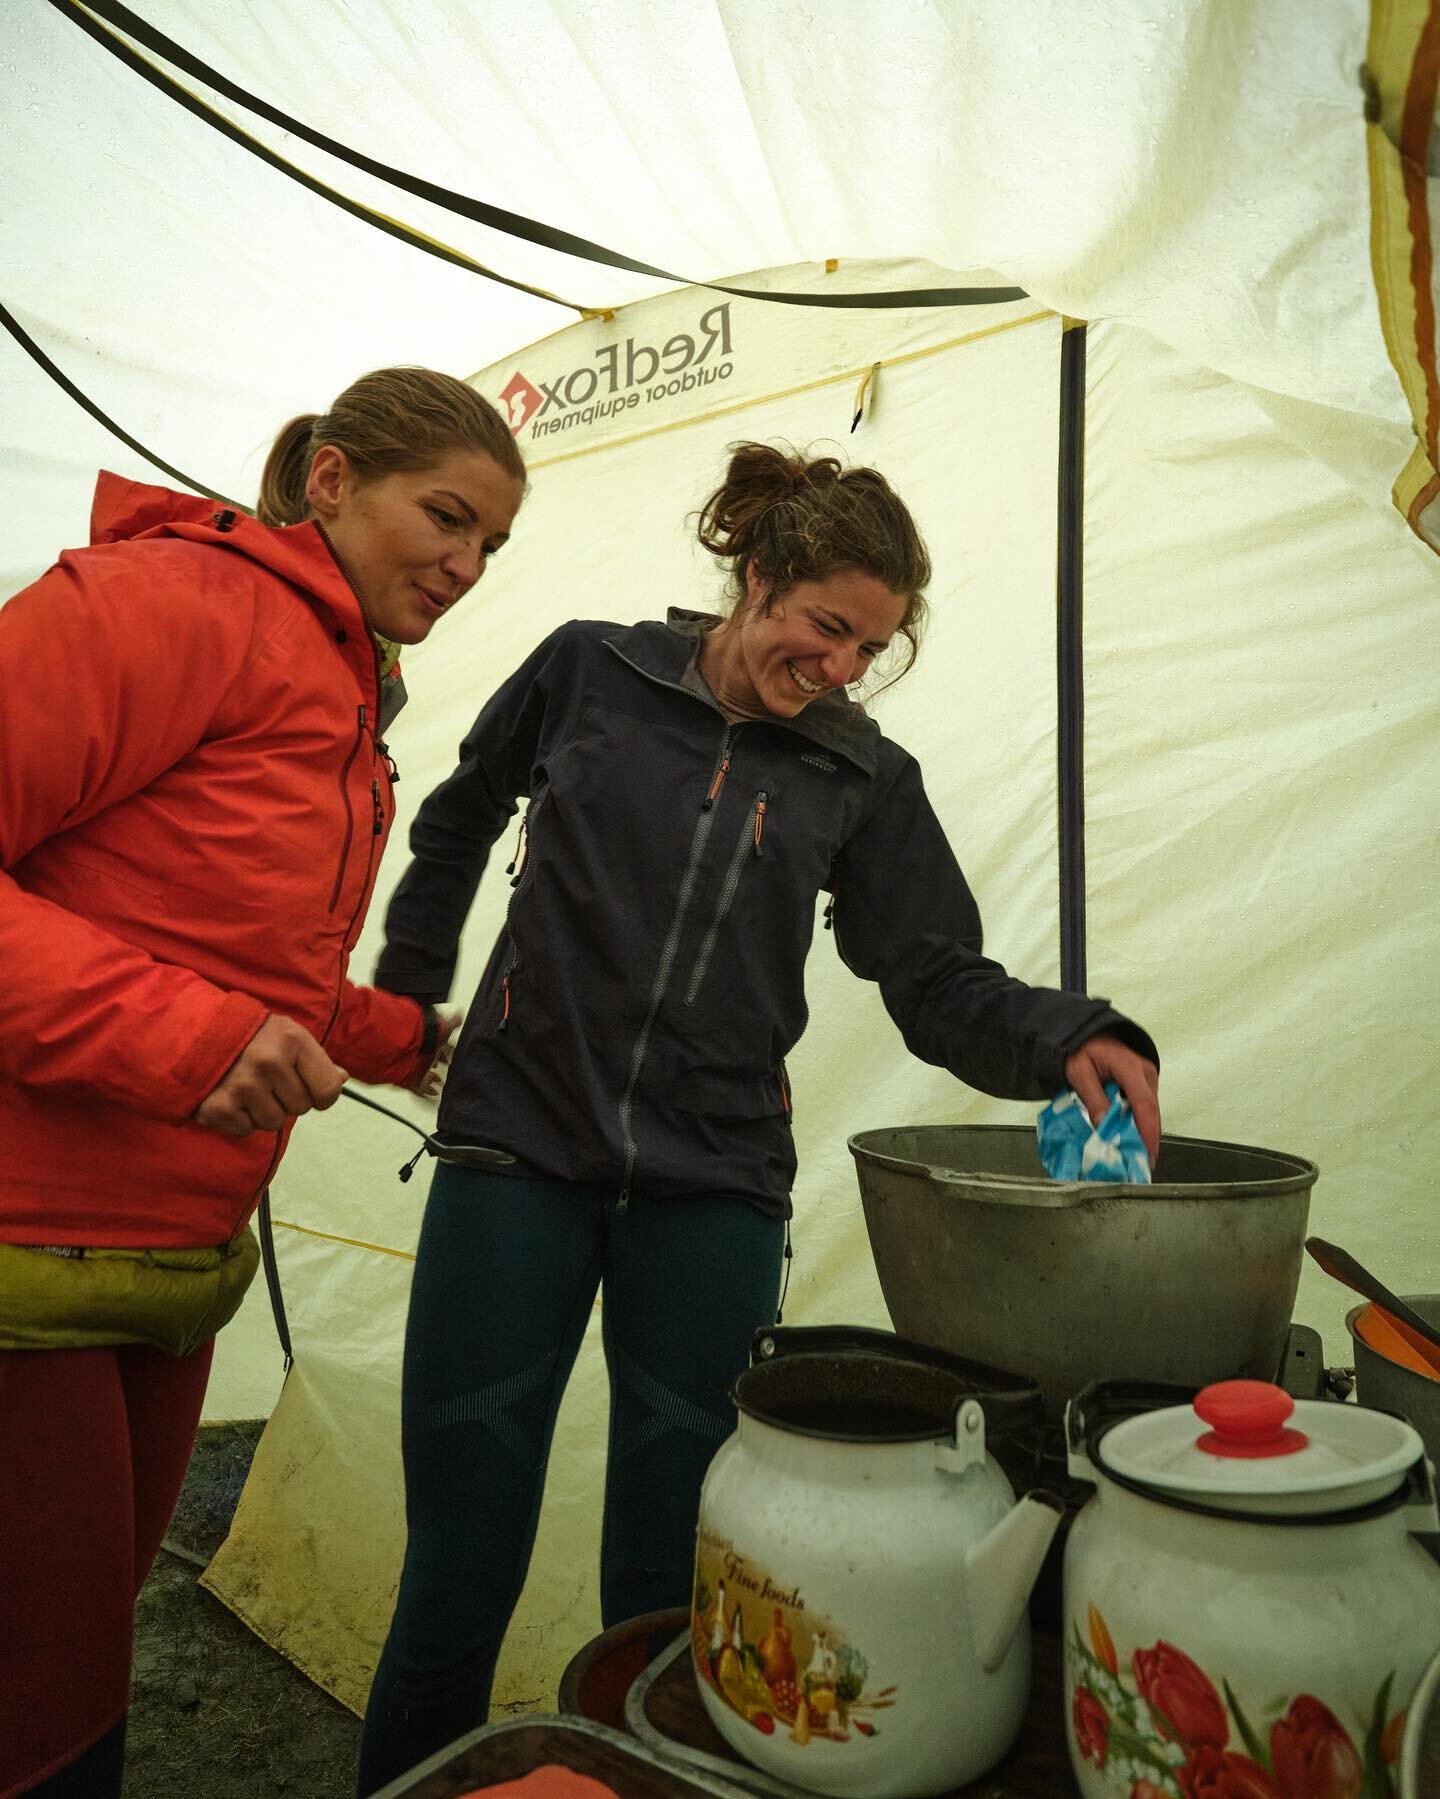 ⚠️ Disclaimer: I promise all cooking duties were distributed equally&hellip;

Rachel and Ewa saving the day with some home made hot chocolate. Not sure where the chocolate came from.

#expedition #basecamp #extremecooking #cooking #livebreatheoutdoor